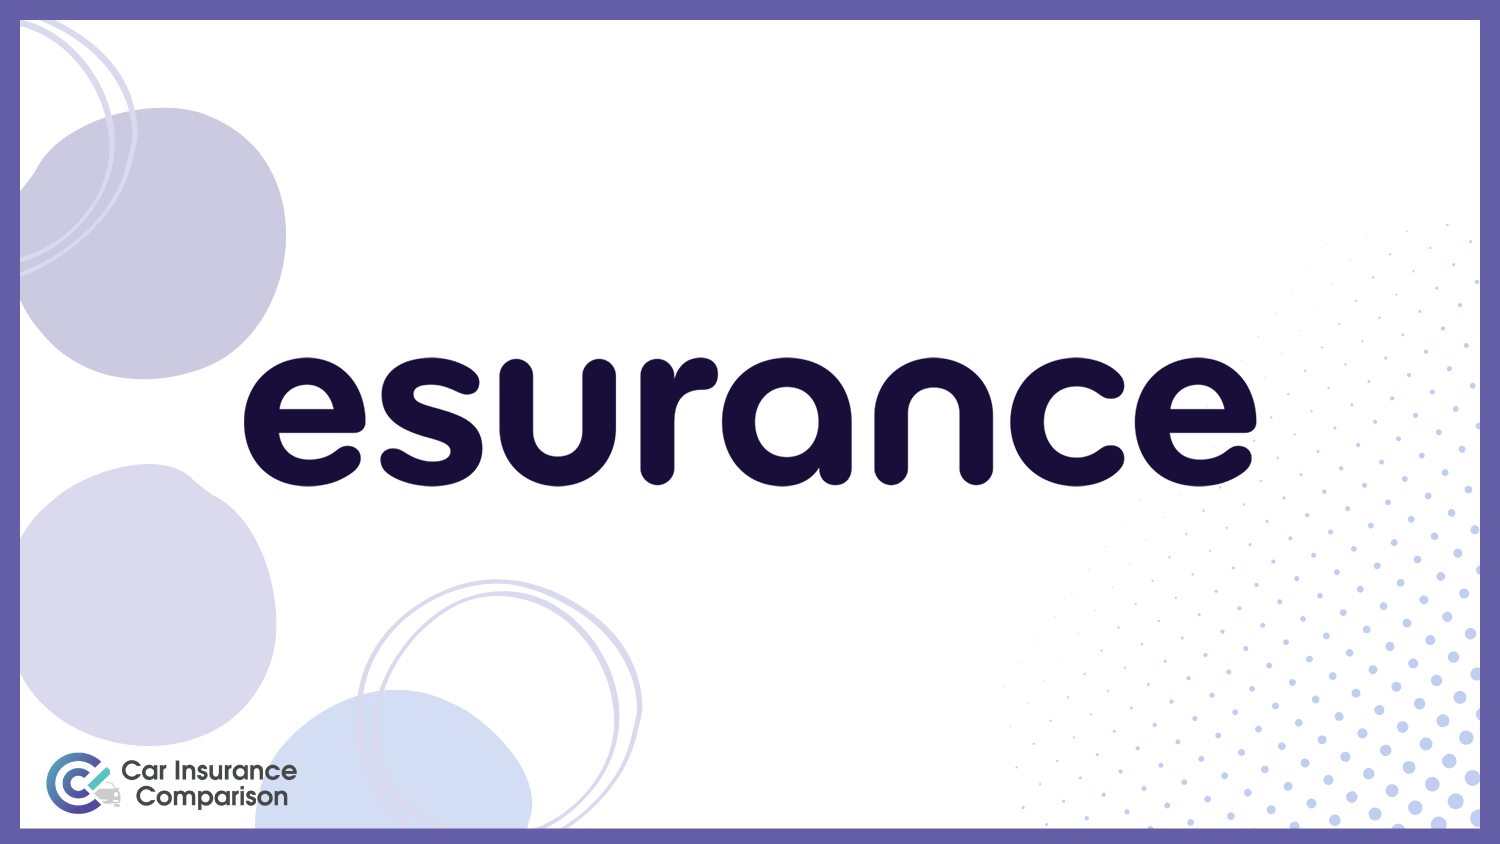 Esurance: Compare Car Insurance Rates for Disabled Drivers